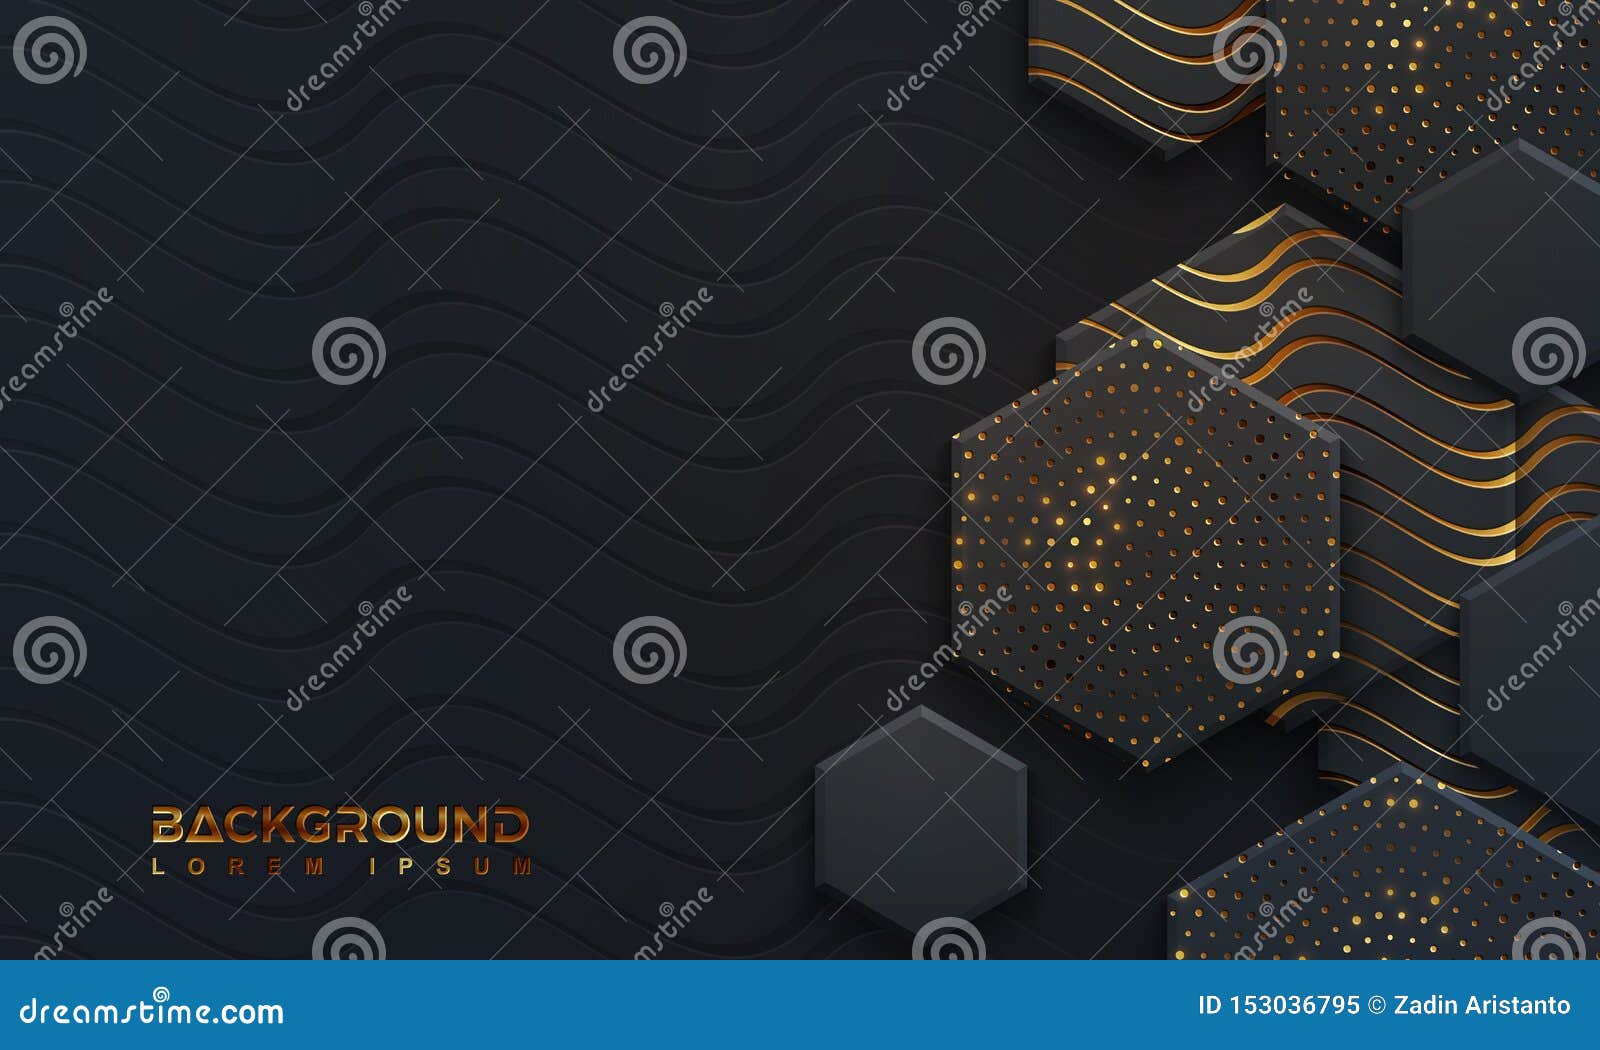 luxury black background with 3d style. dark background with wavy lines. background for posters, banners, ads, covers, wallpapers